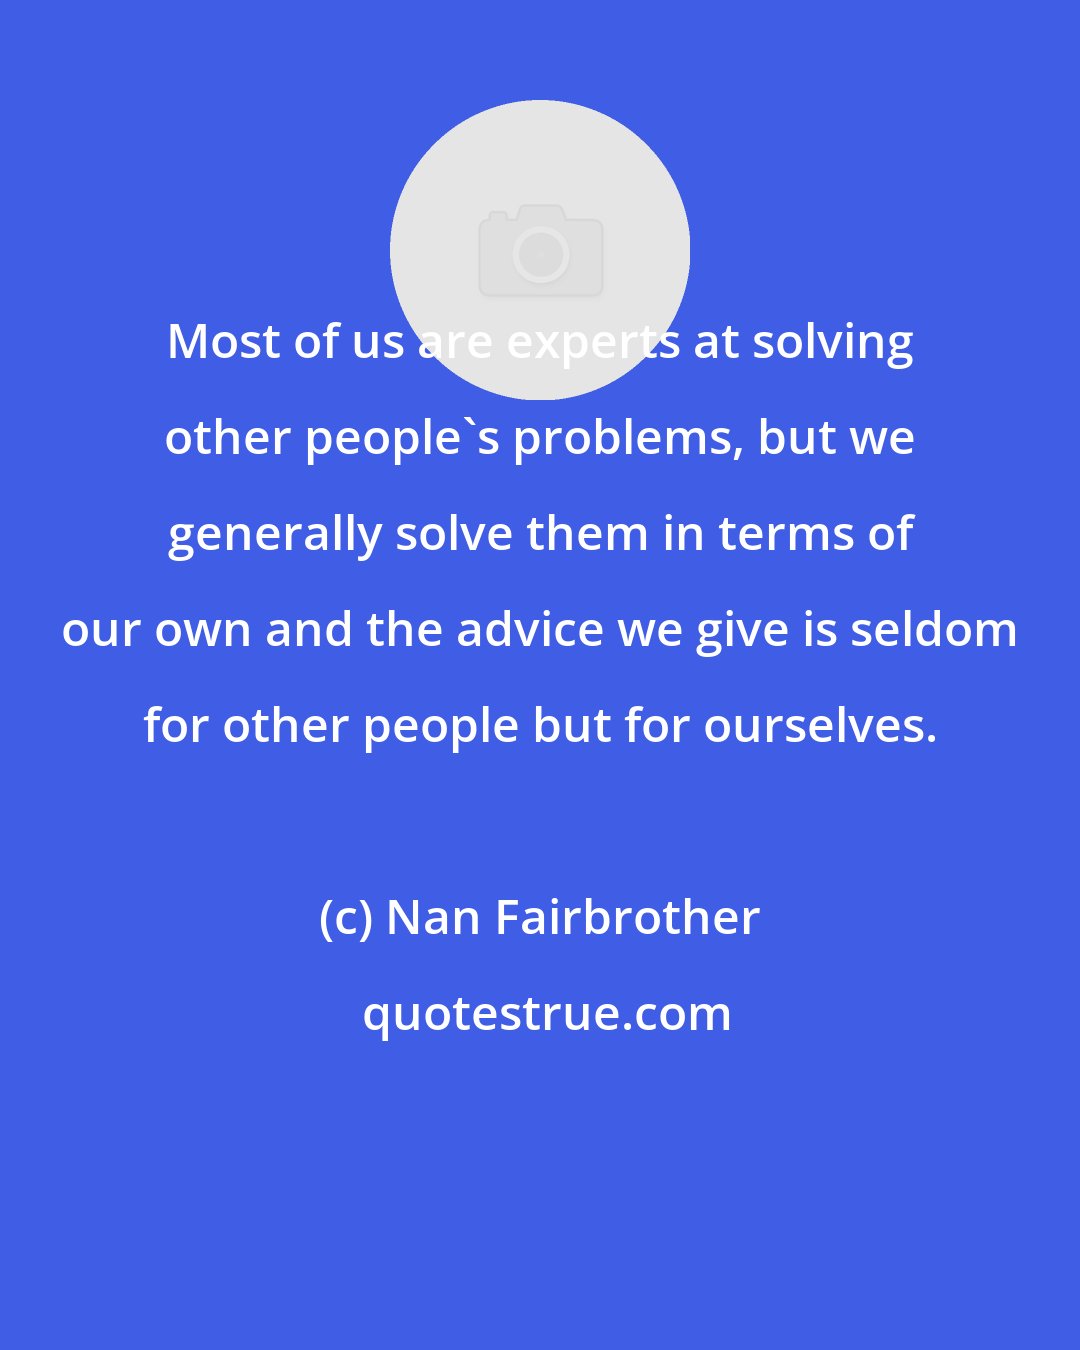 Nan Fairbrother: Most of us are experts at solving other people's problems, but we generally solve them in terms of our own and the advice we give is seldom for other people but for ourselves.